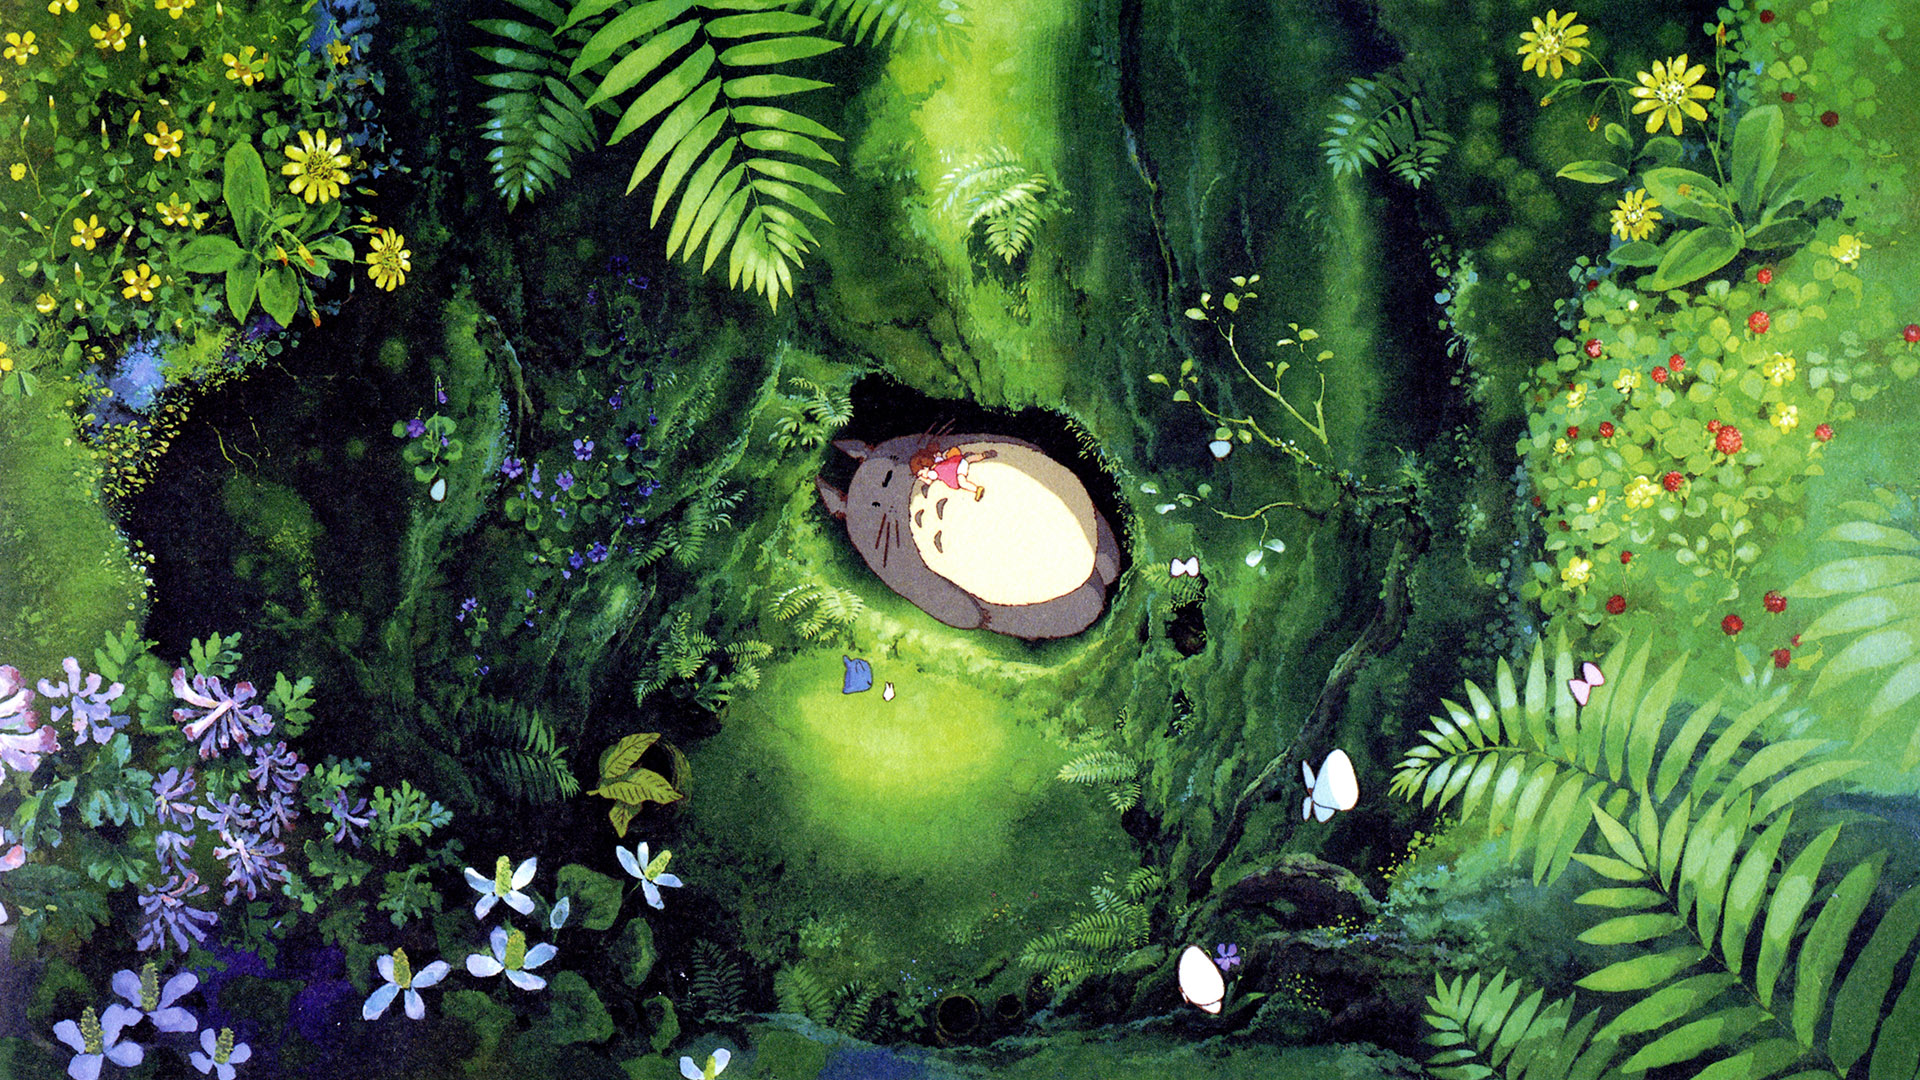 51 My Neighbor Totoro HD Wallpapers Backgrounds - Wallpaper Abyss